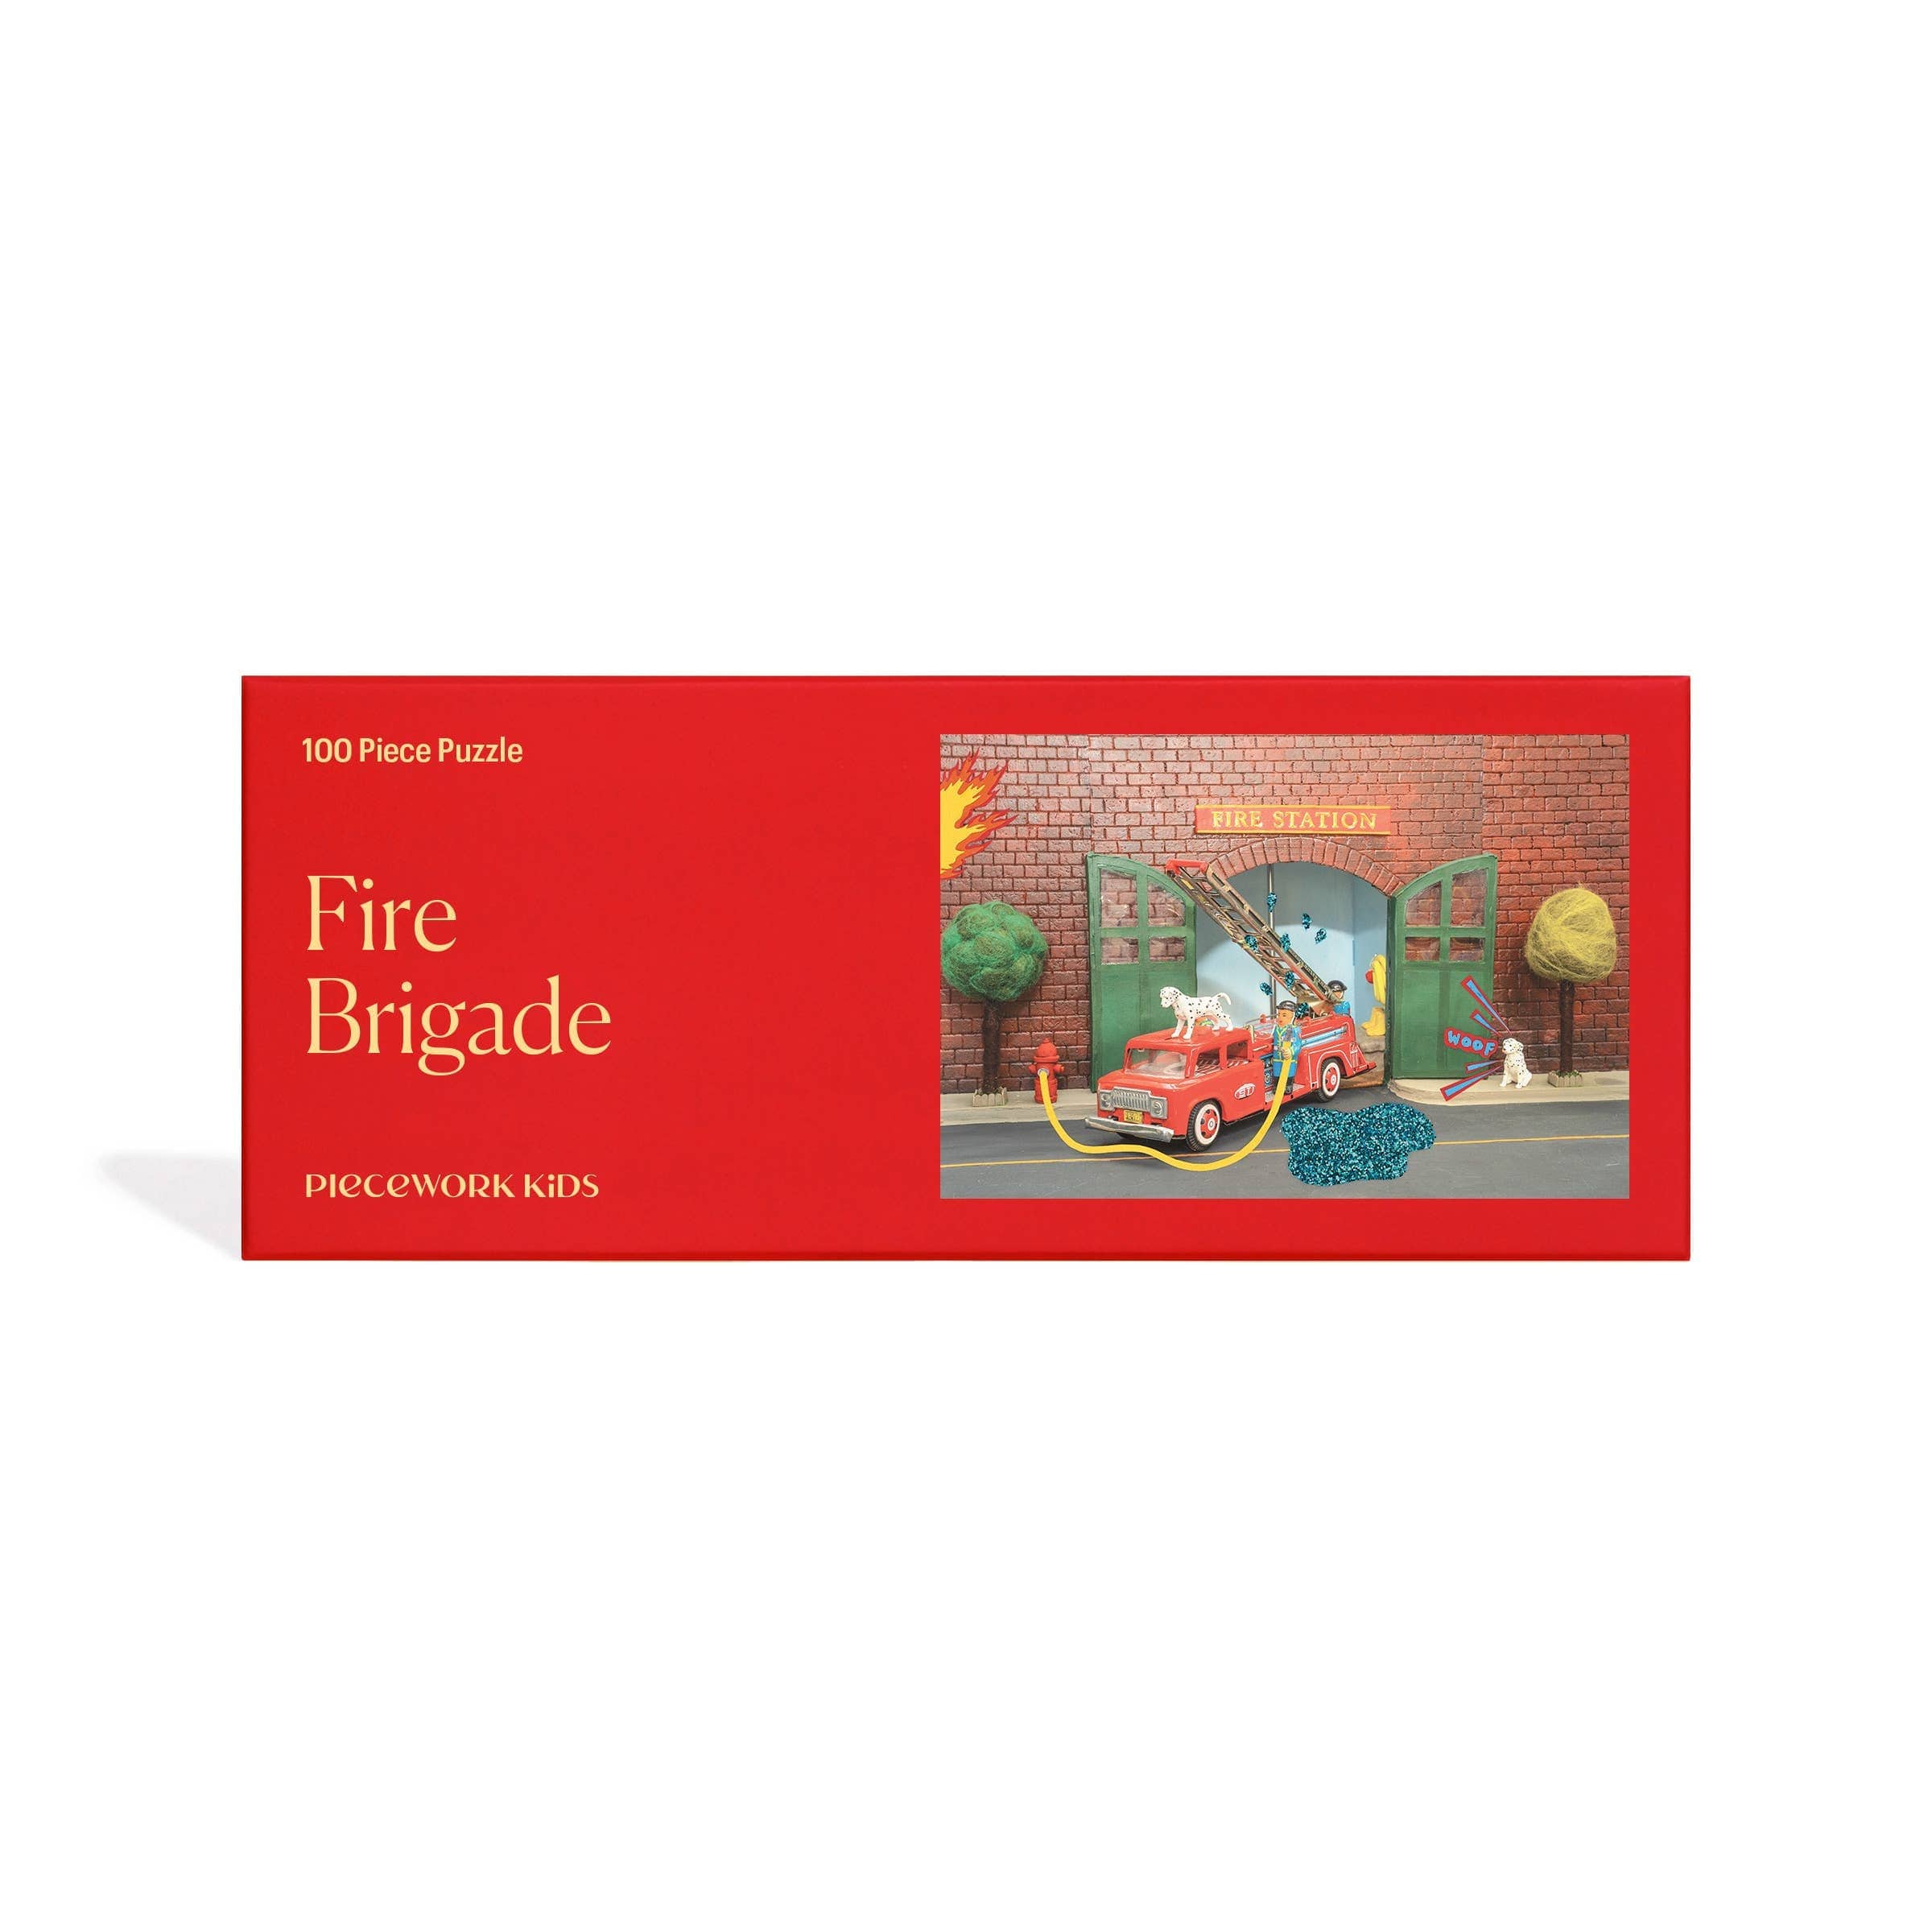 ✨NEW✨ Fire Brigade - 100 Piece Puzzle by Piecework Puzzles